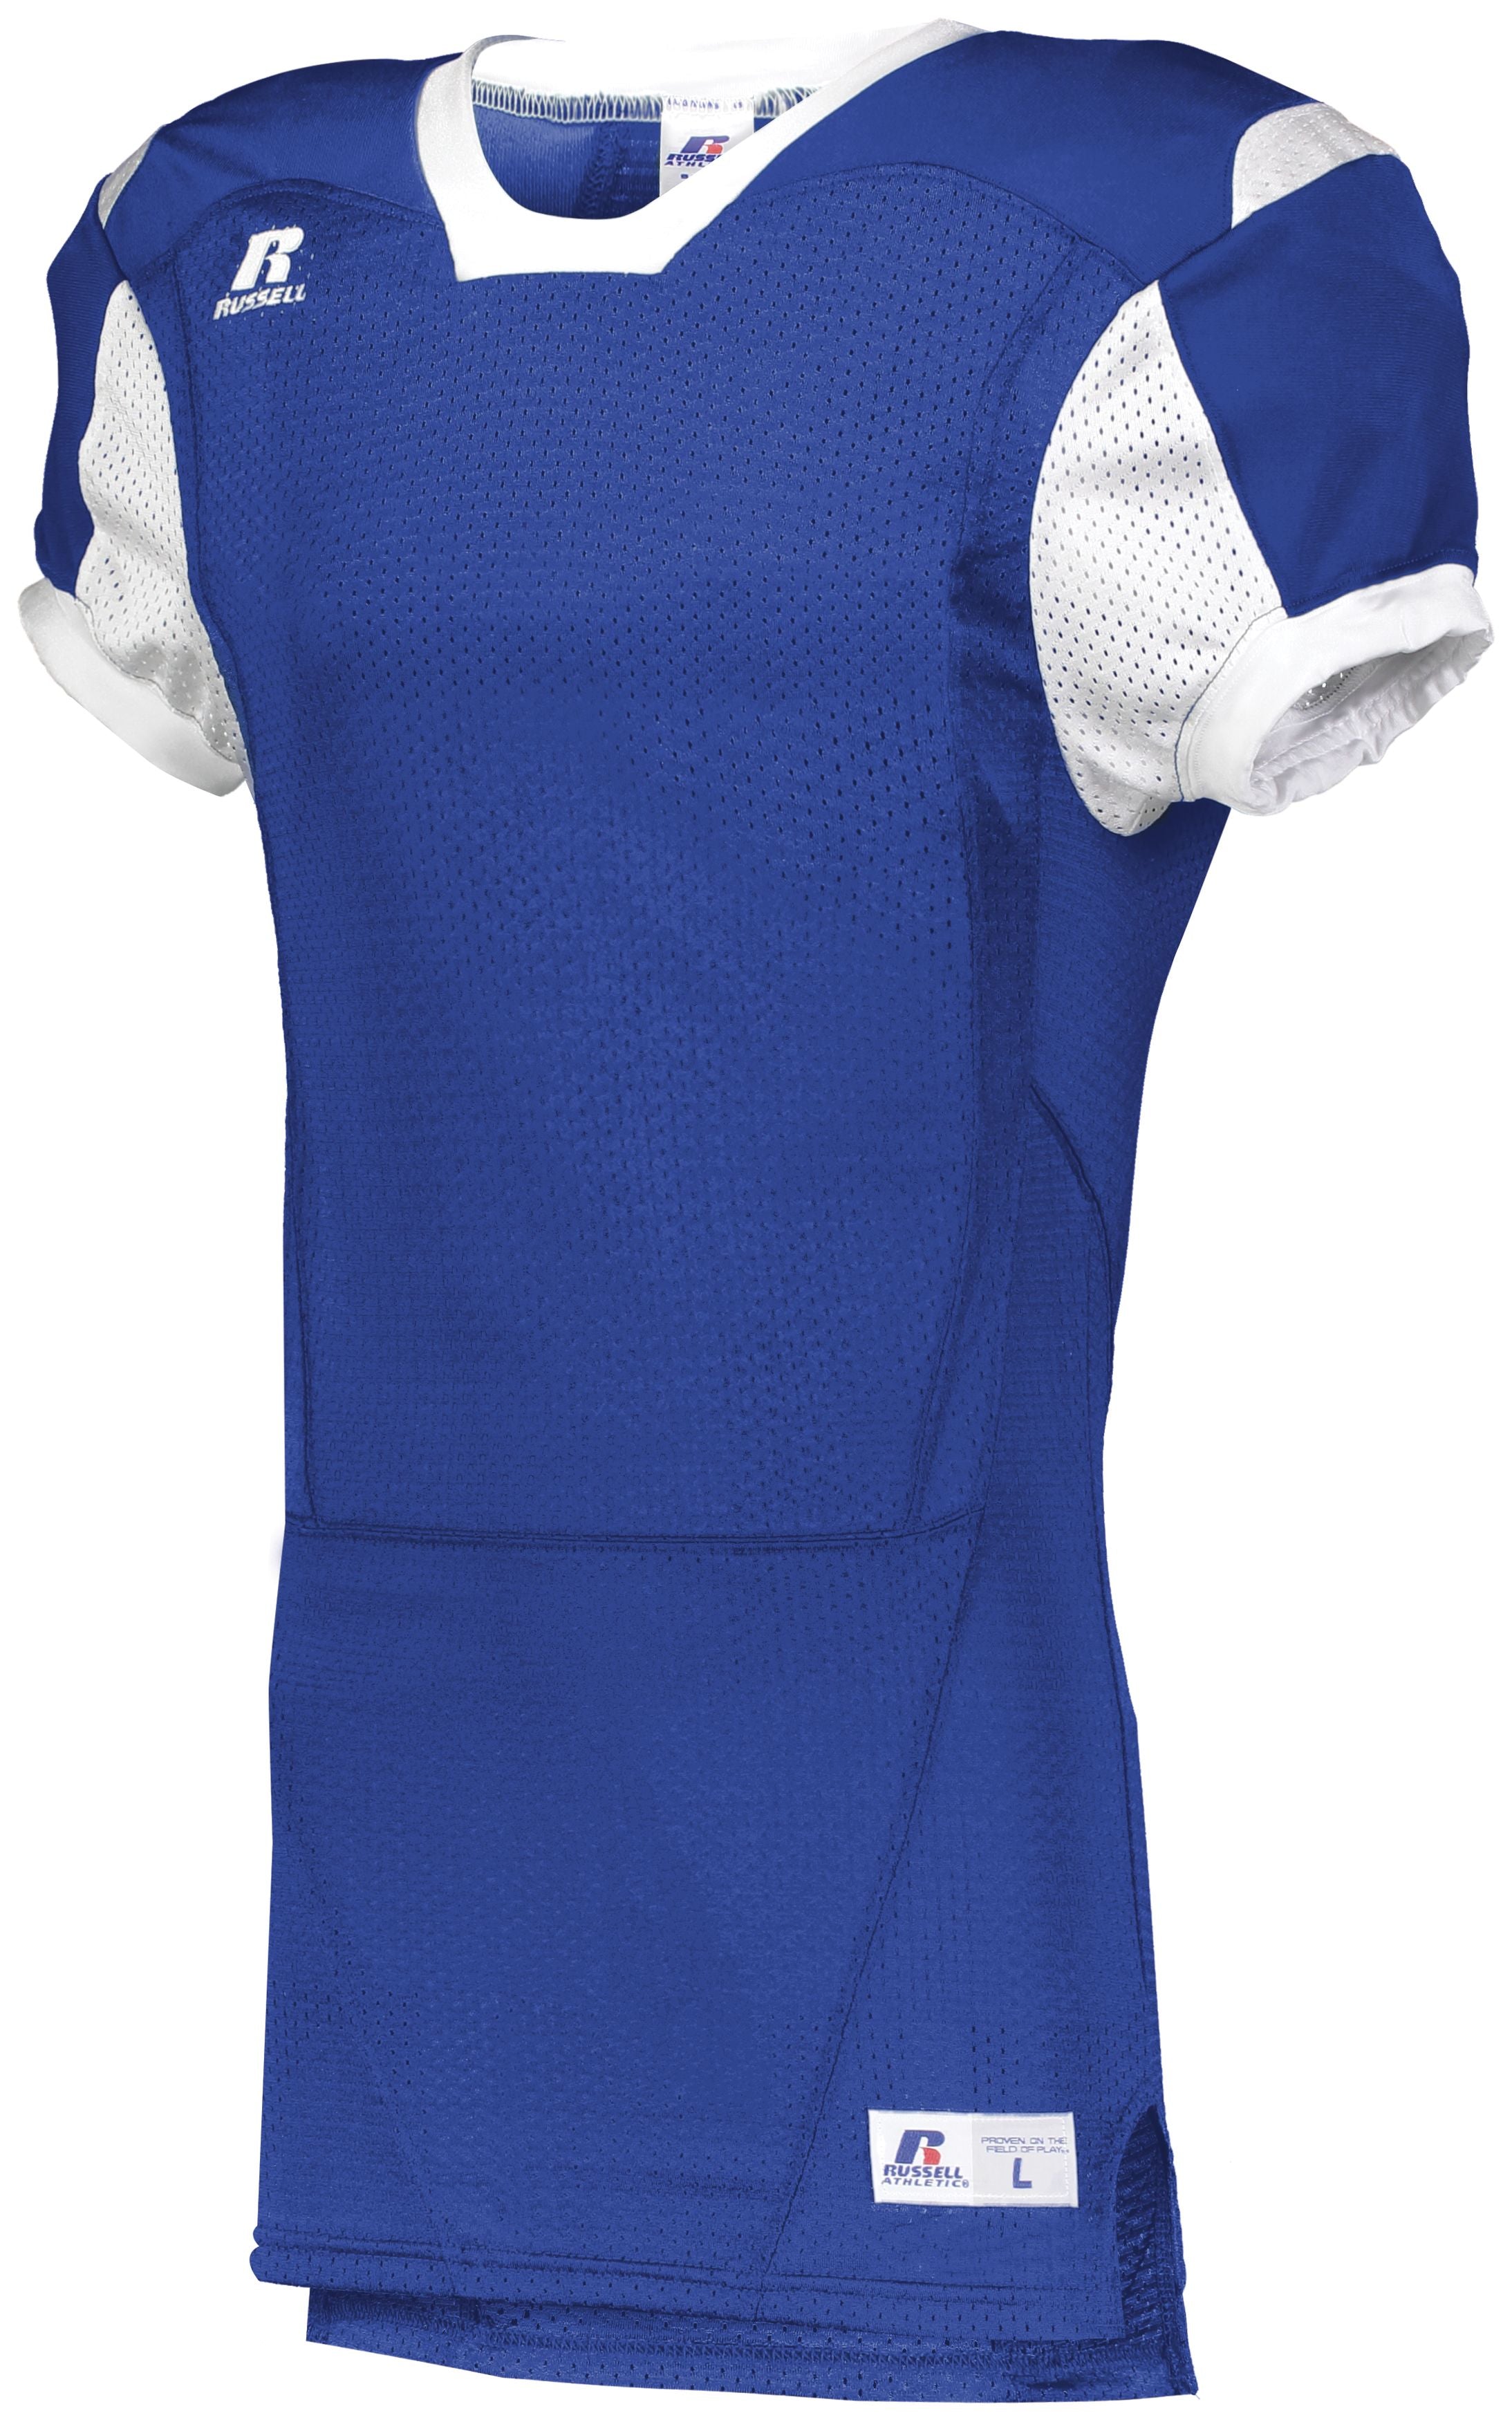 Russell Athletic Youth Color Block Game Jersey in Royal/White  -Part of the Youth, Youth-Jersey, Football, Russell-Athletic-Products, Shirts, All-Sports, All-Sports-1 product lines at KanaleyCreations.com